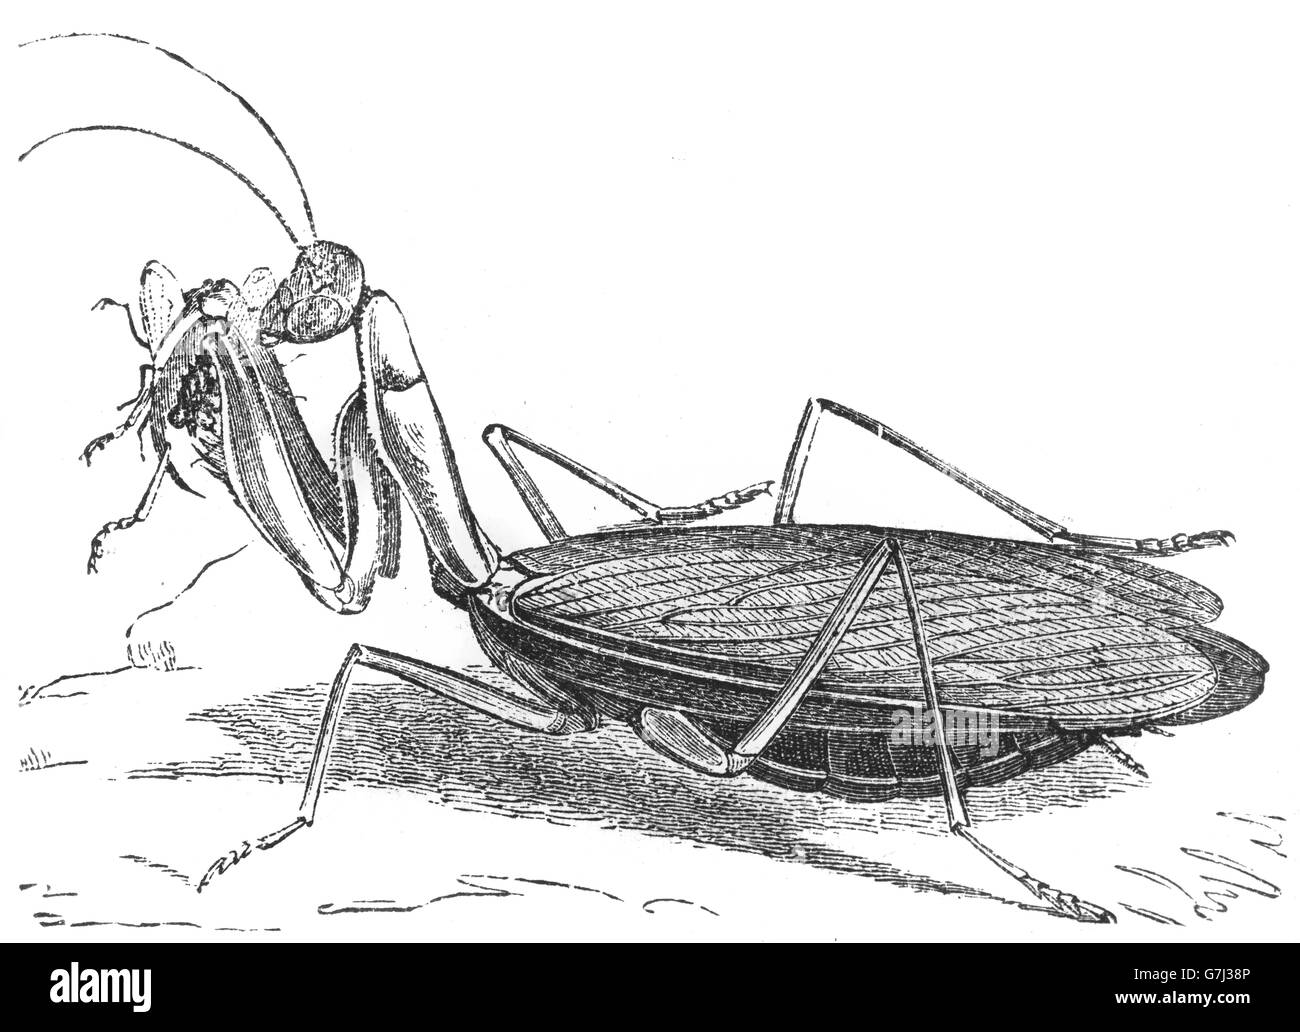 Mantis religiosa, praying mantis, insect, Mantidae, illustration from book dated 1904 Stock Photo